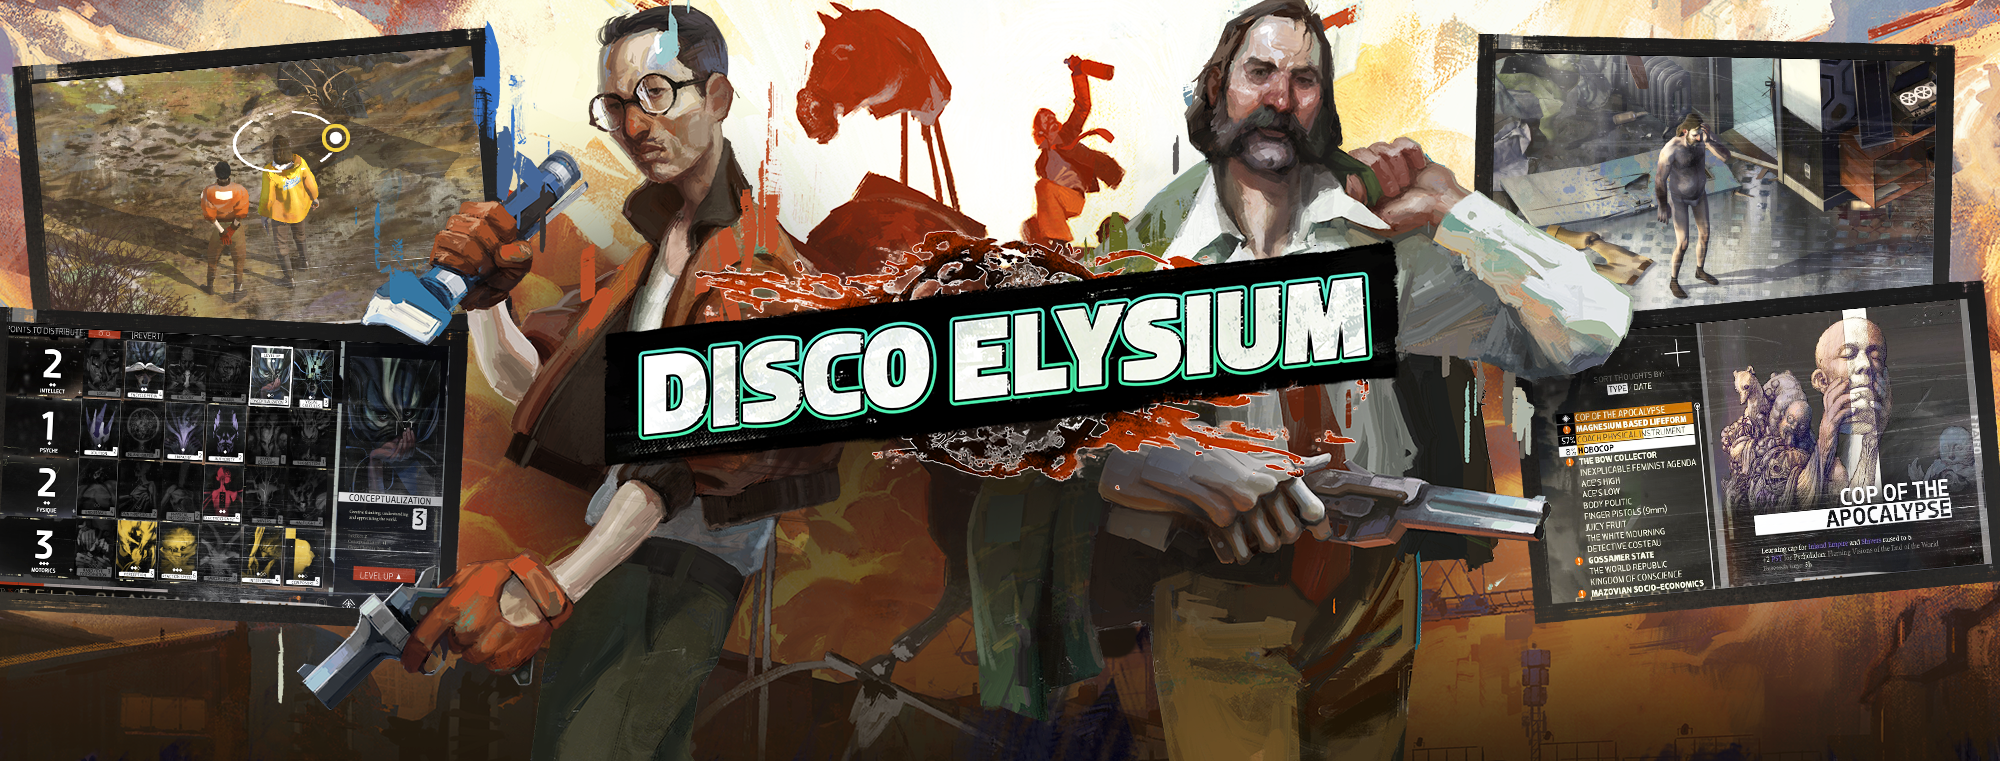 How Disco Elysium Mocks Fascists By Letting You Play As One Uppercut